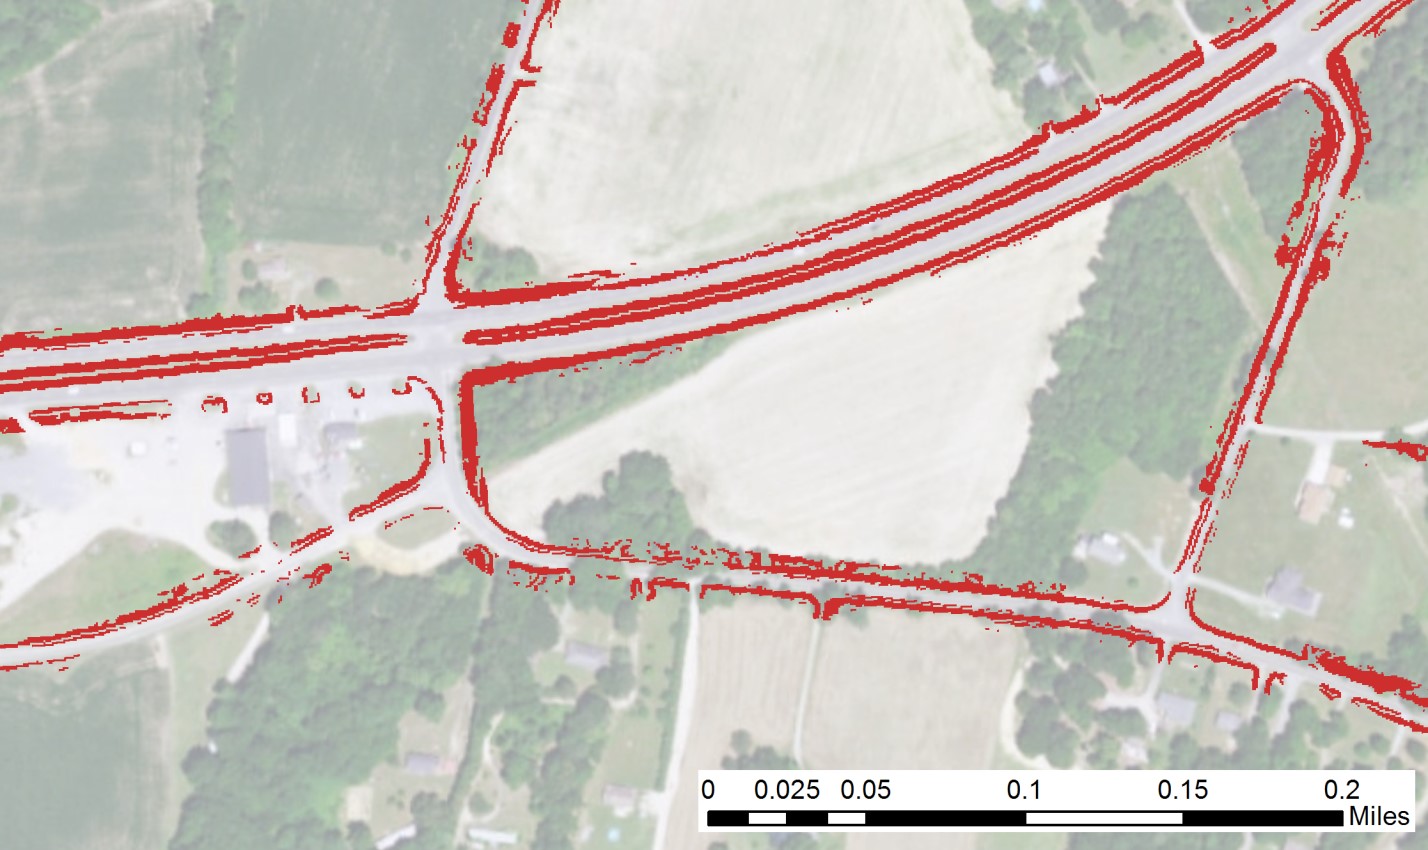 The red areas in the imagery represent roadside ditches extracted from lidar data.